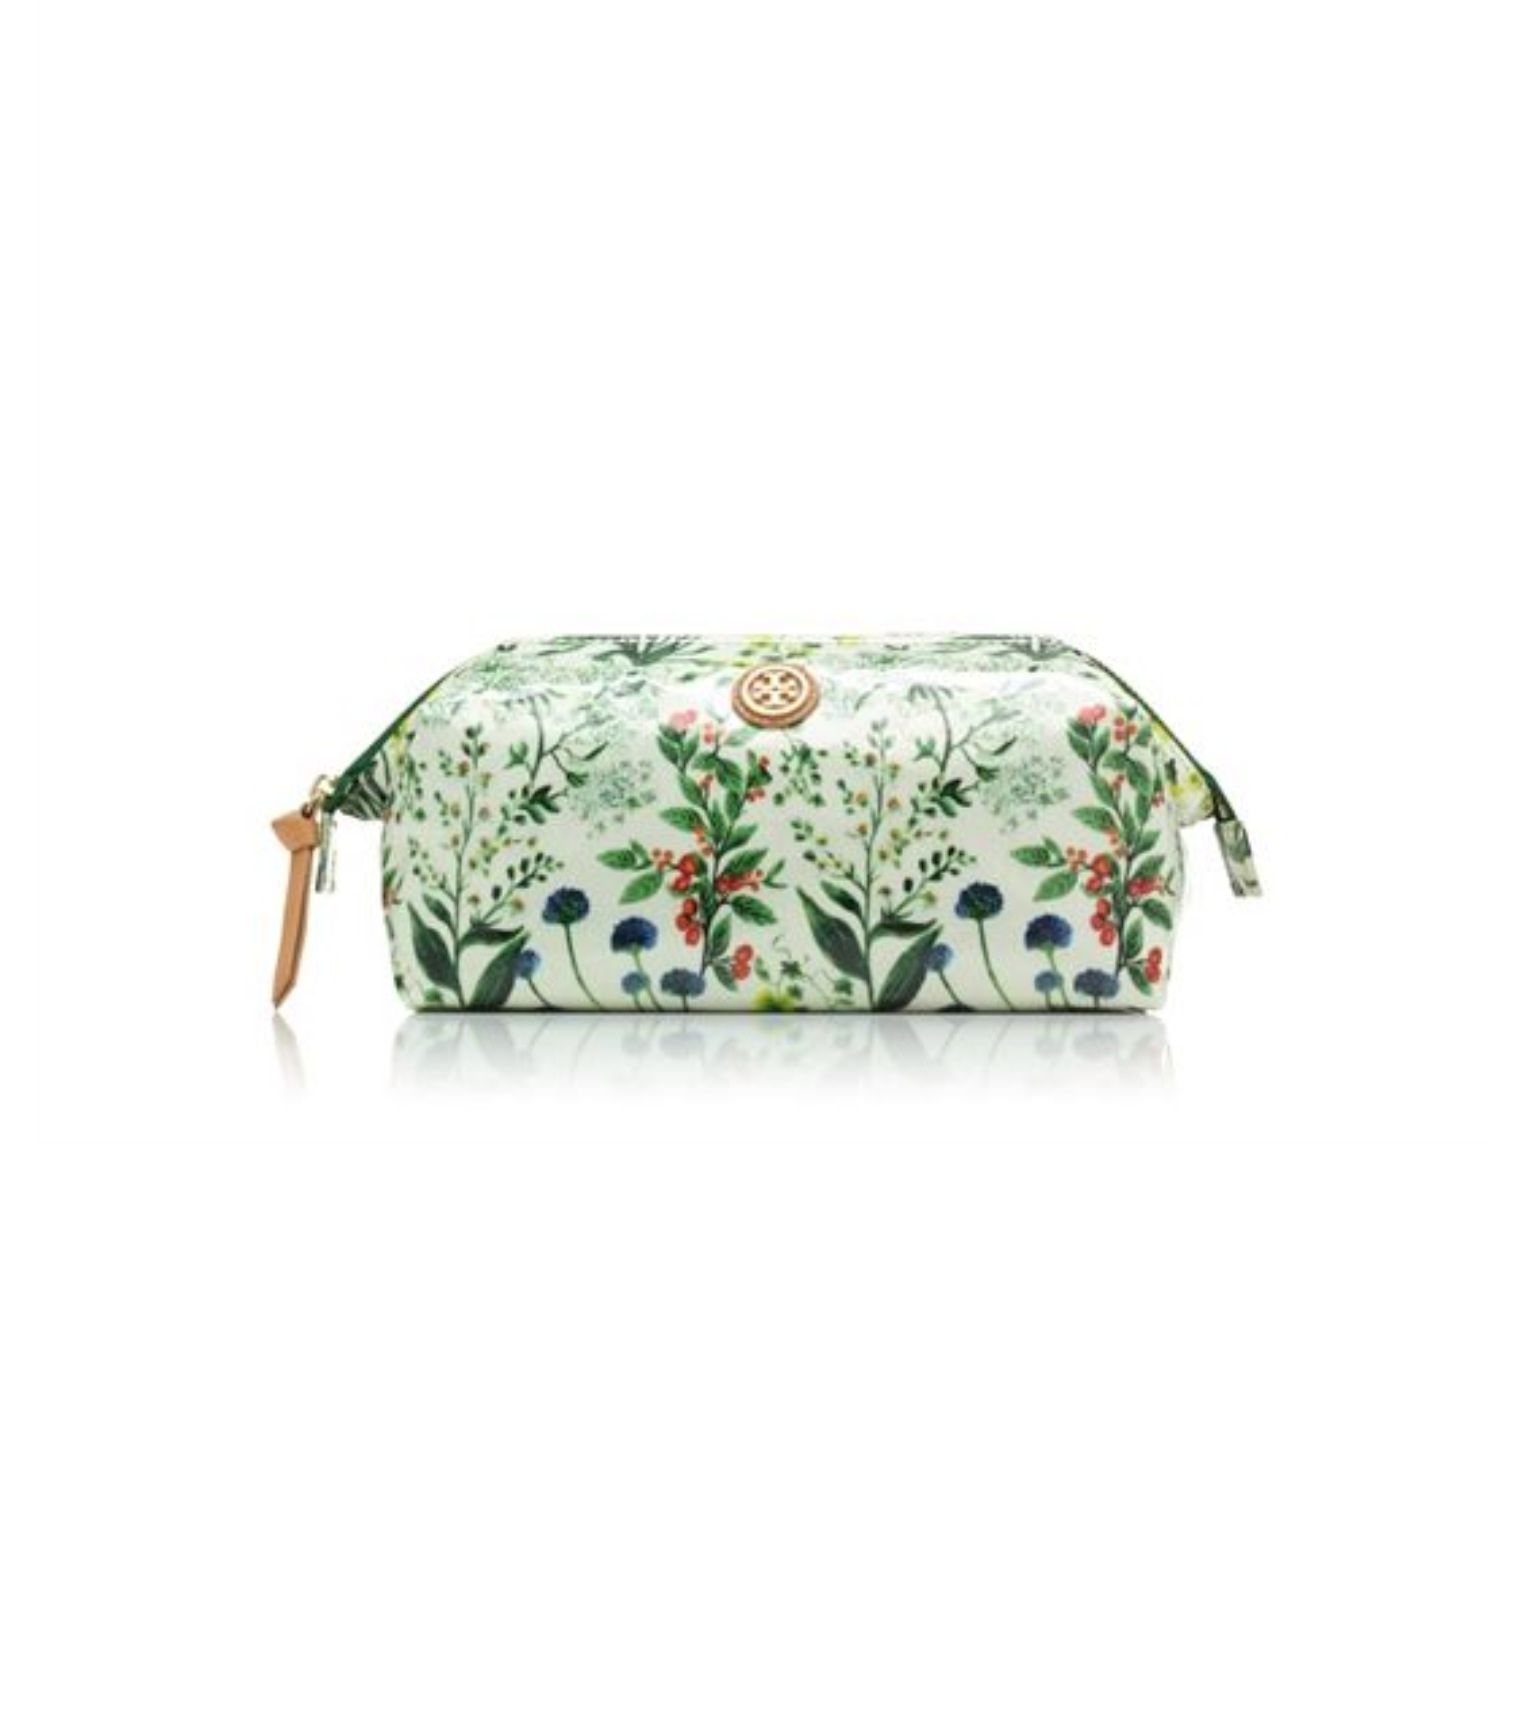 Tory Burch Large Moulded Cosmetic Case, $95.00